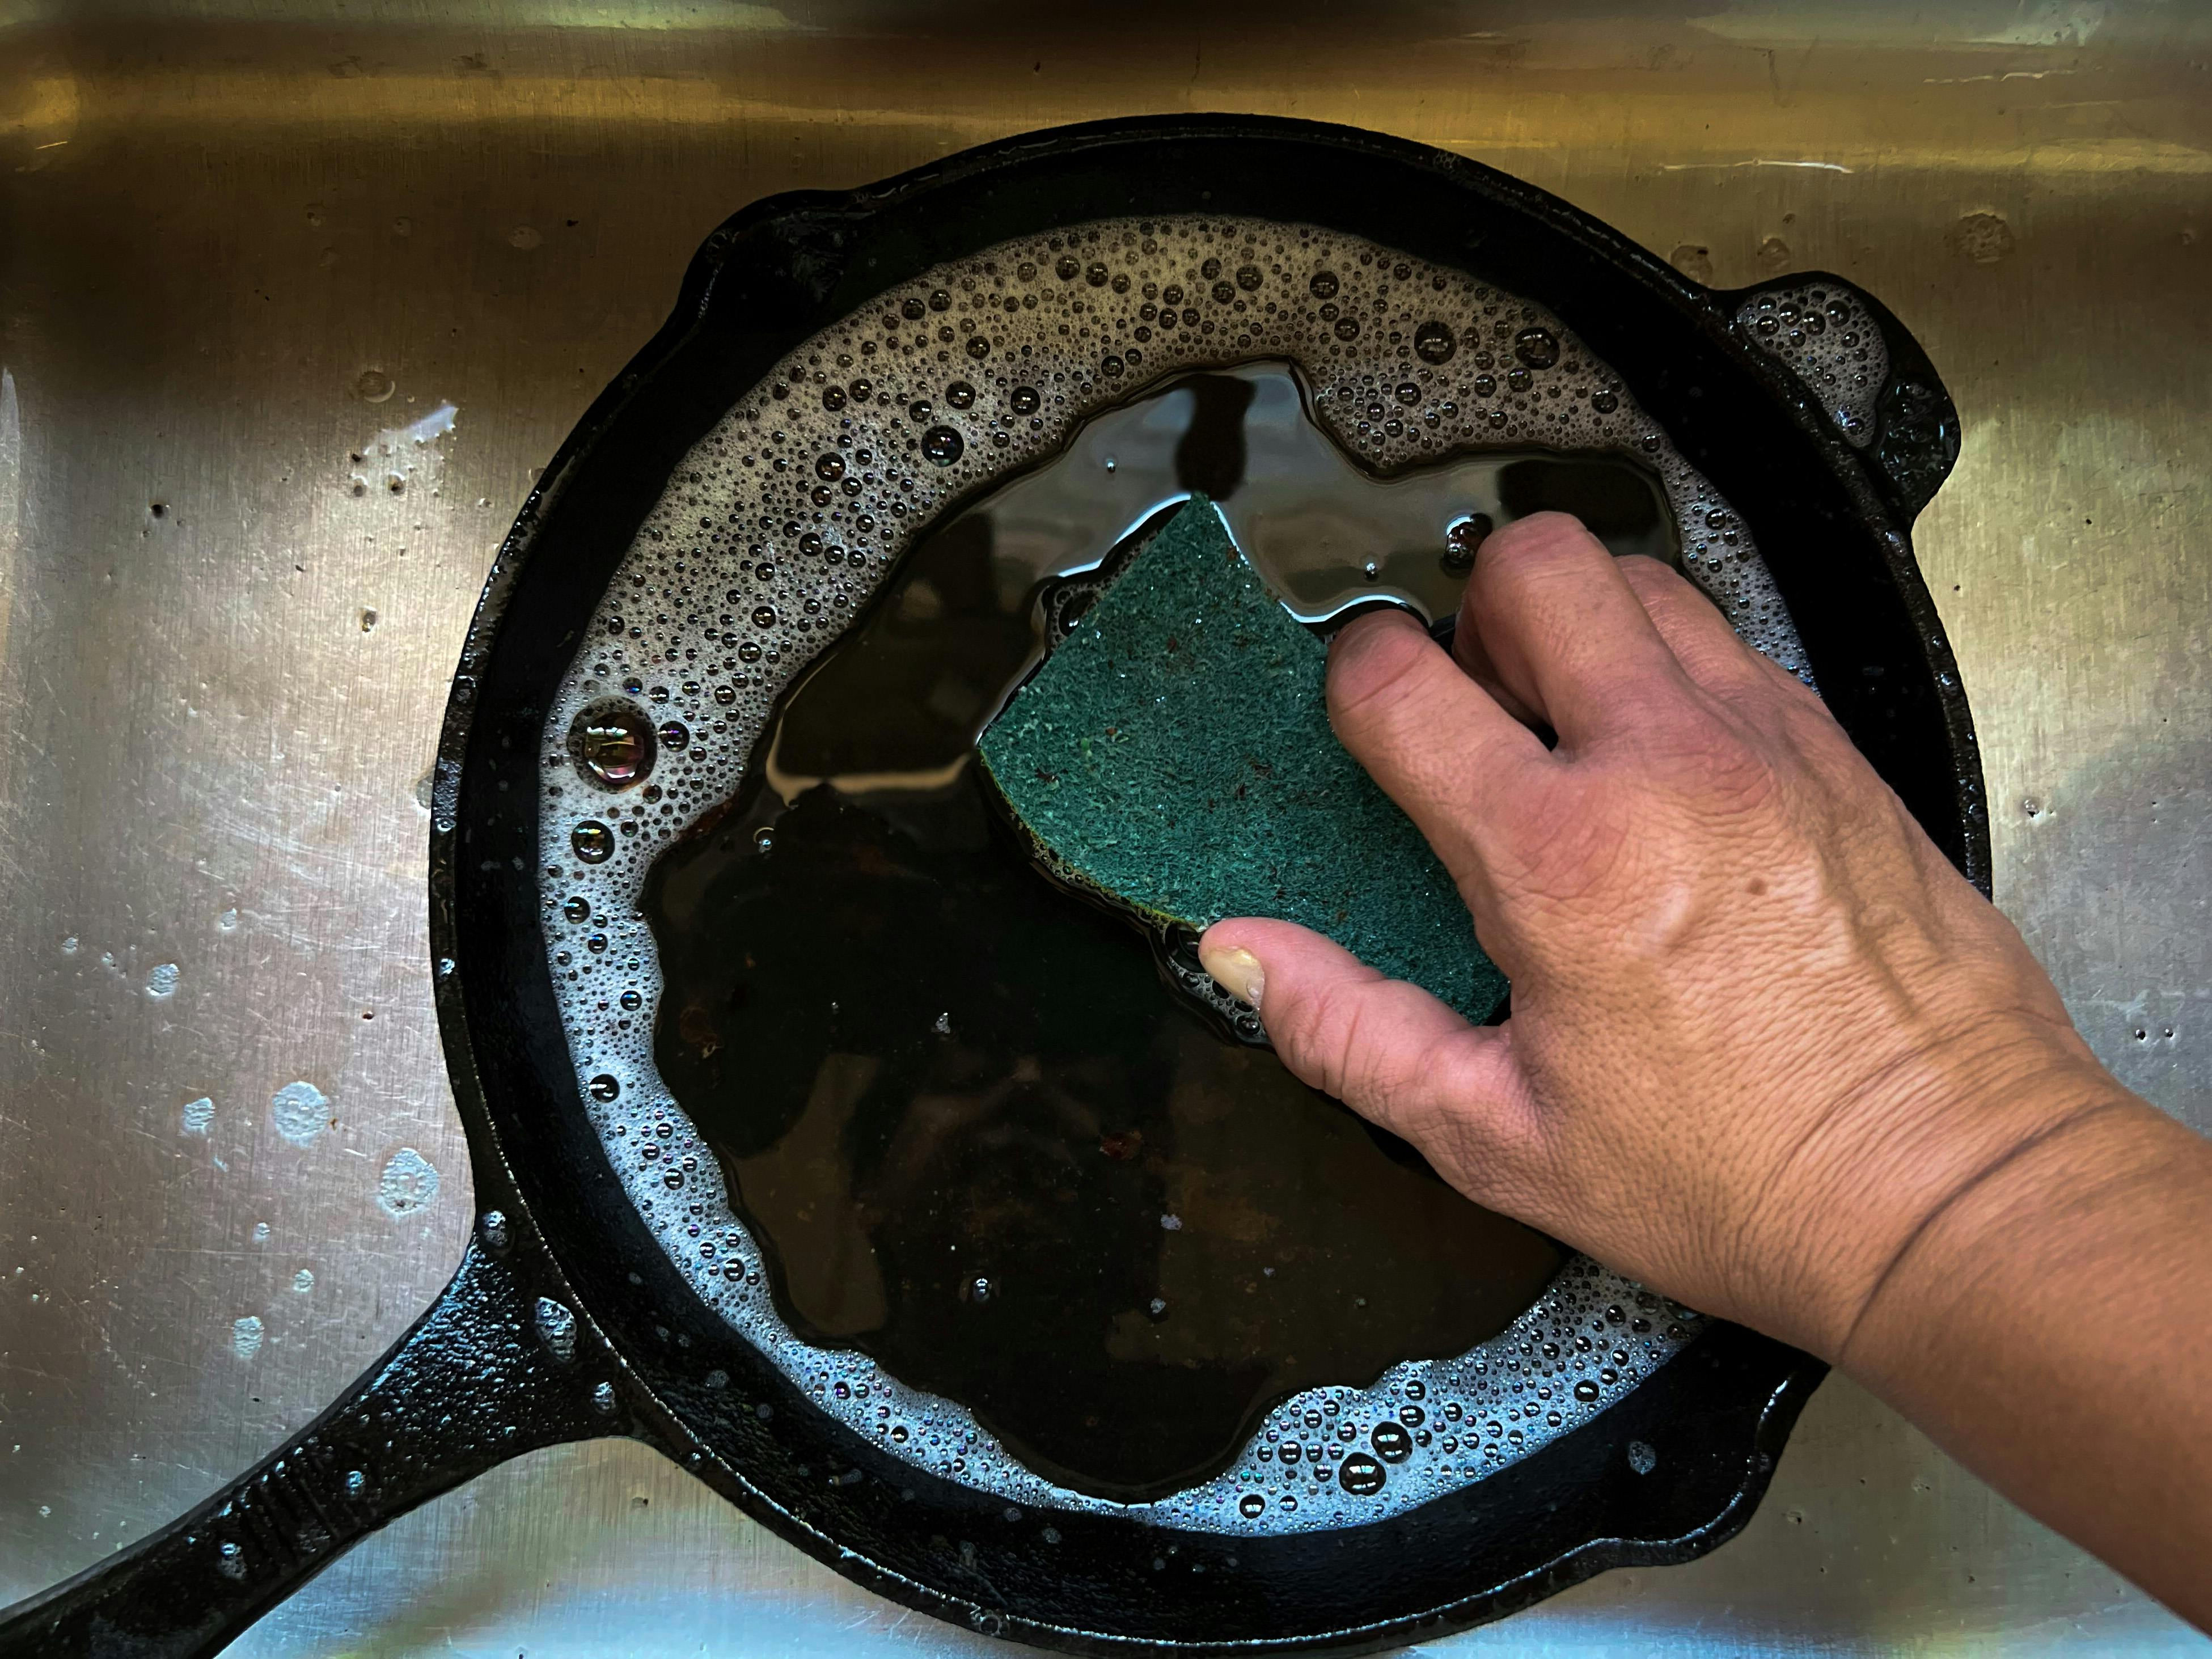 The author washes his cast-iron pan in the sink with a sponge.